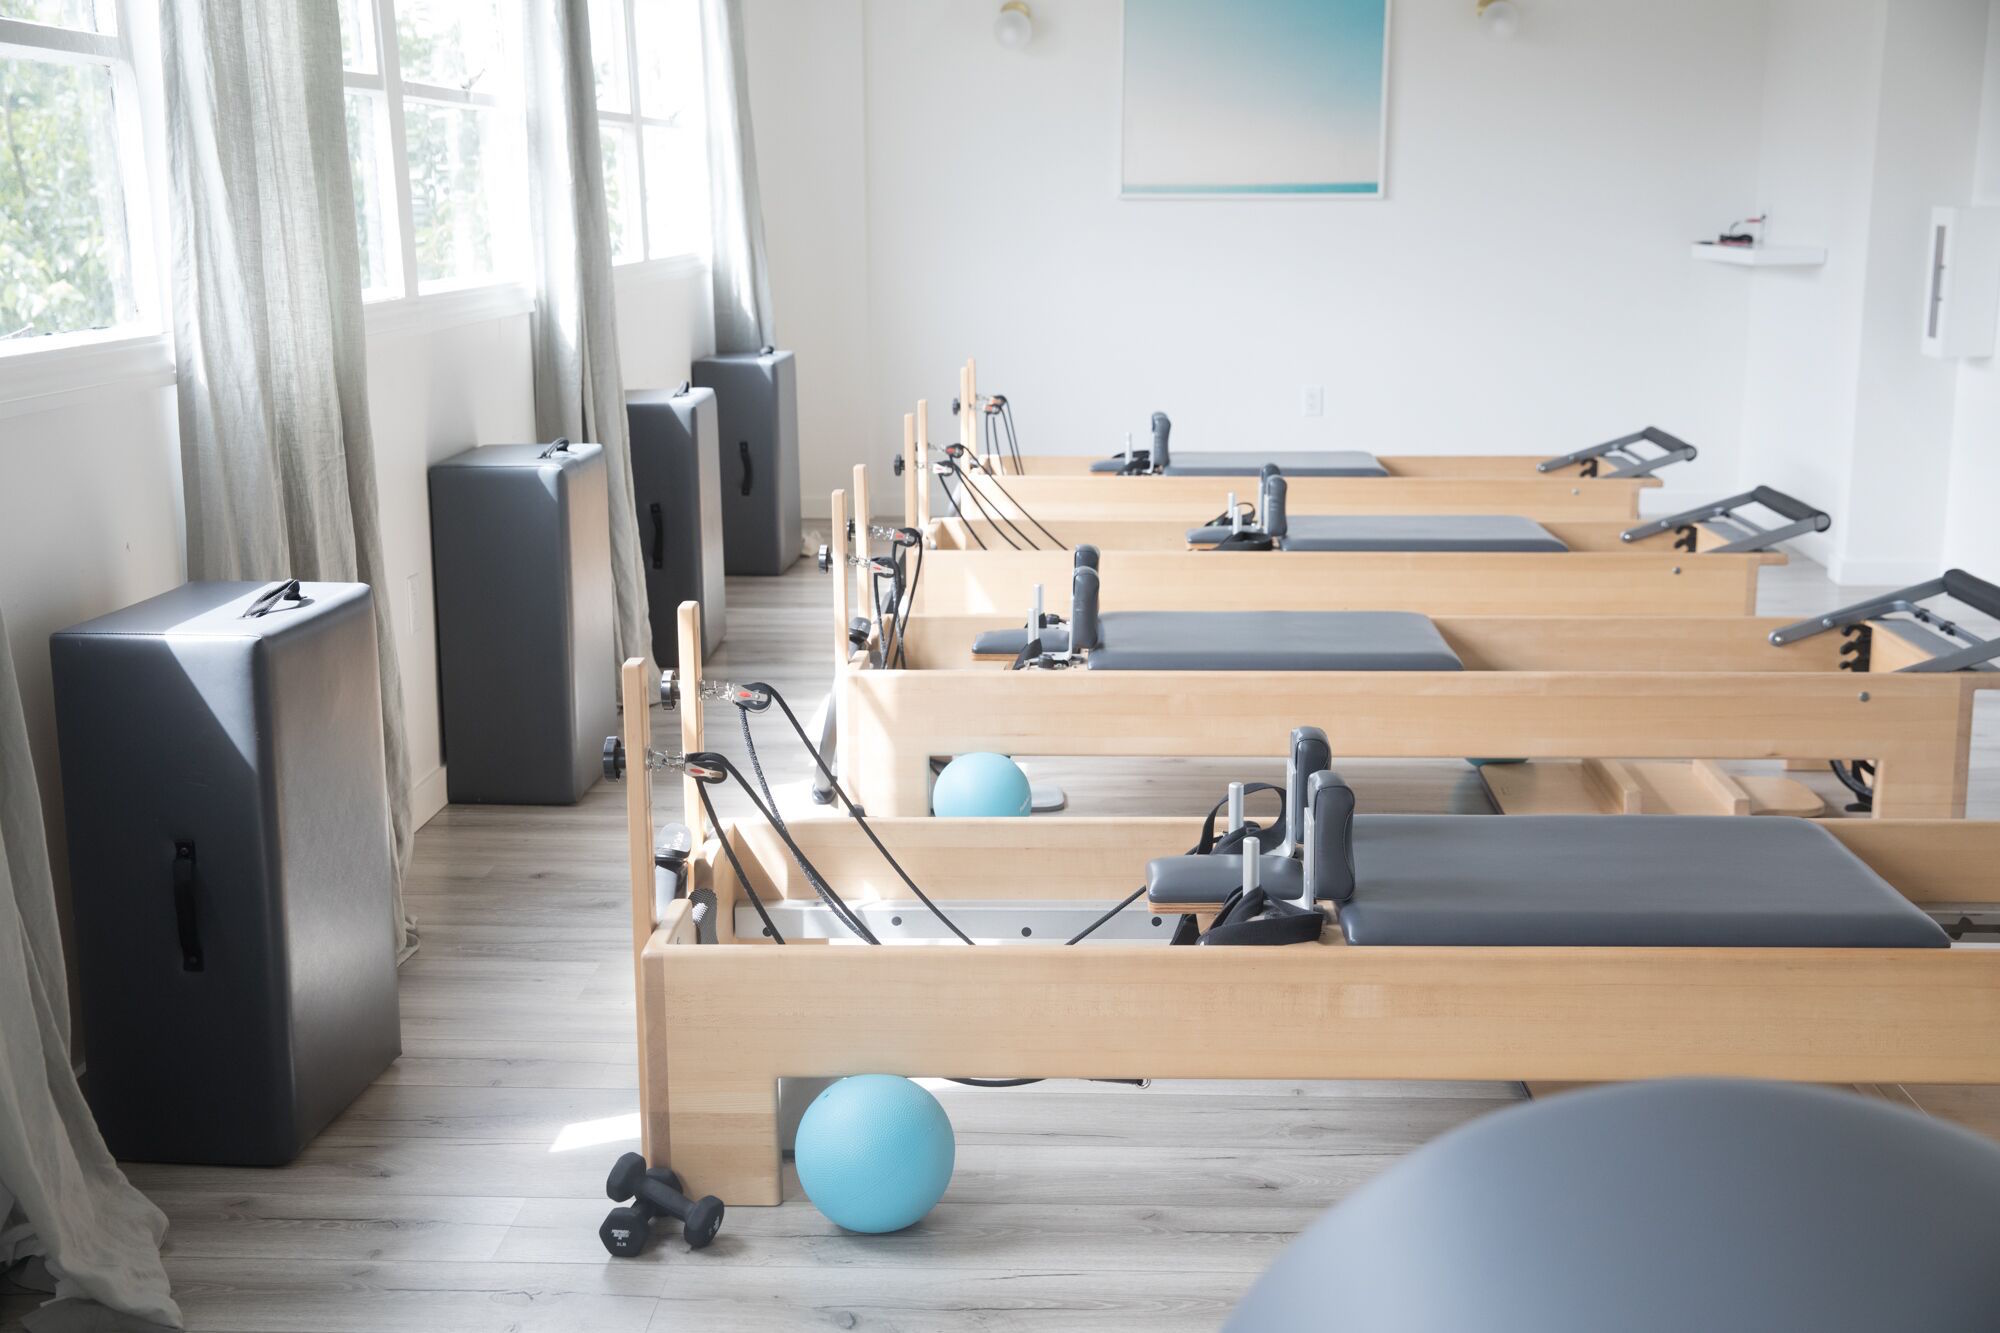 The private pilates room upstairs at MNTStudio